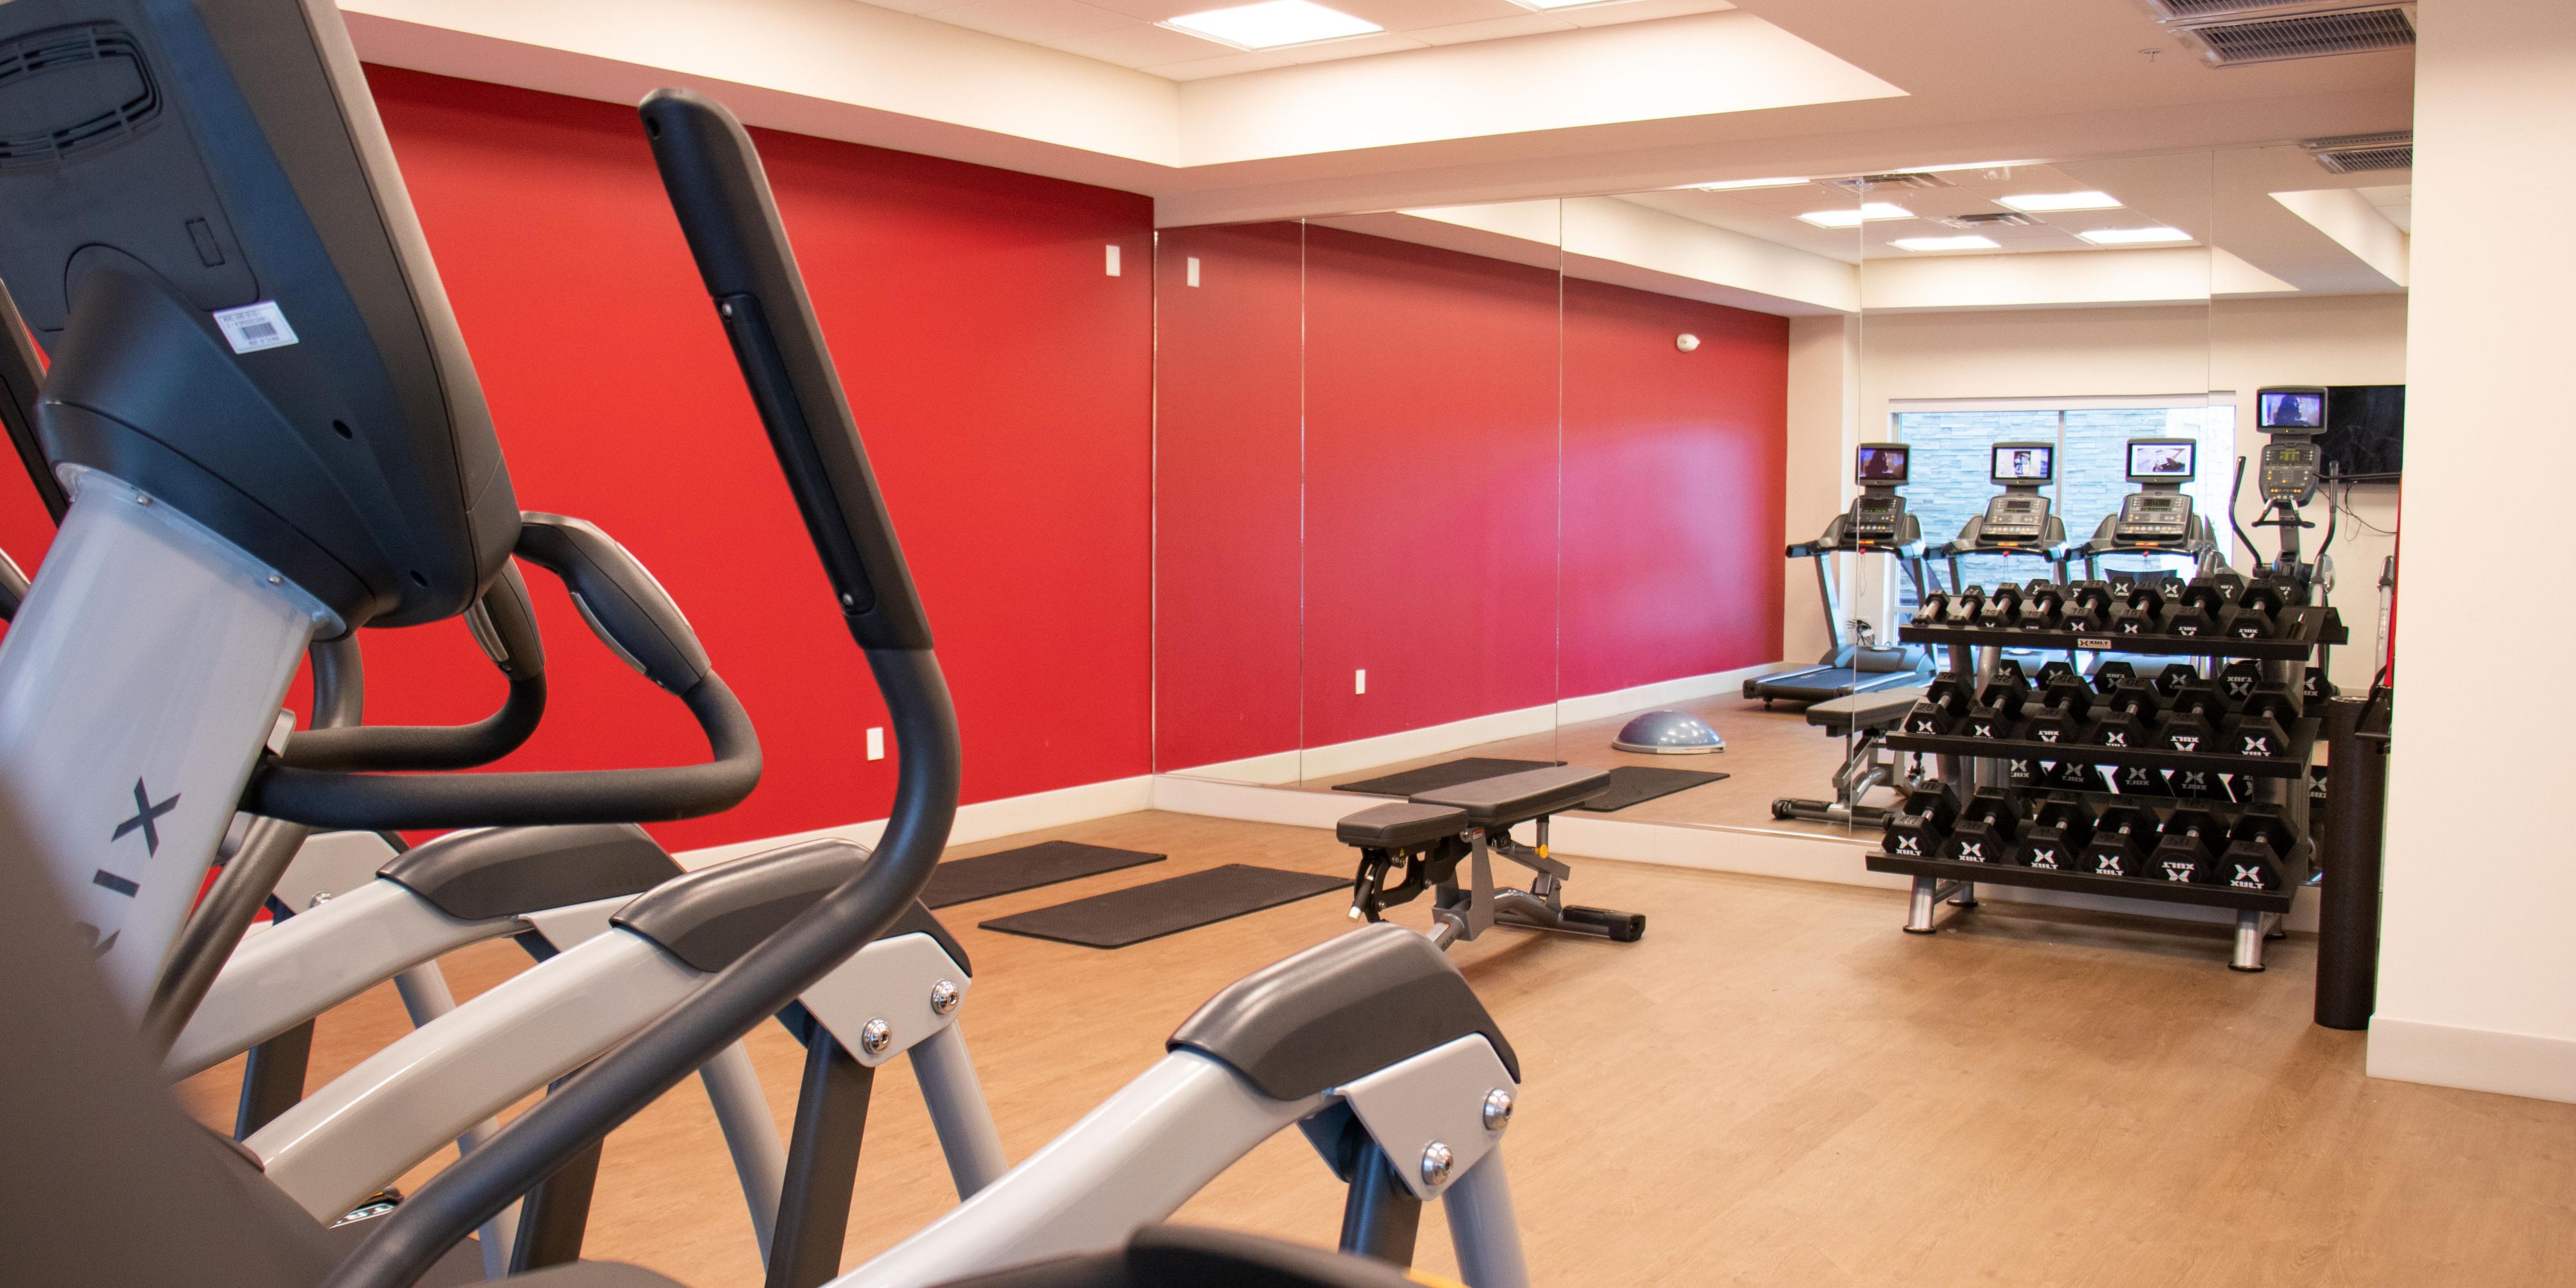 Keep active even when on the road. Our fitness center is equipped with treadmills, ellipticals and stationary bike. The open area allows for functional fitness and weight training. Enjoy the natural light and view of the outdoor pool.